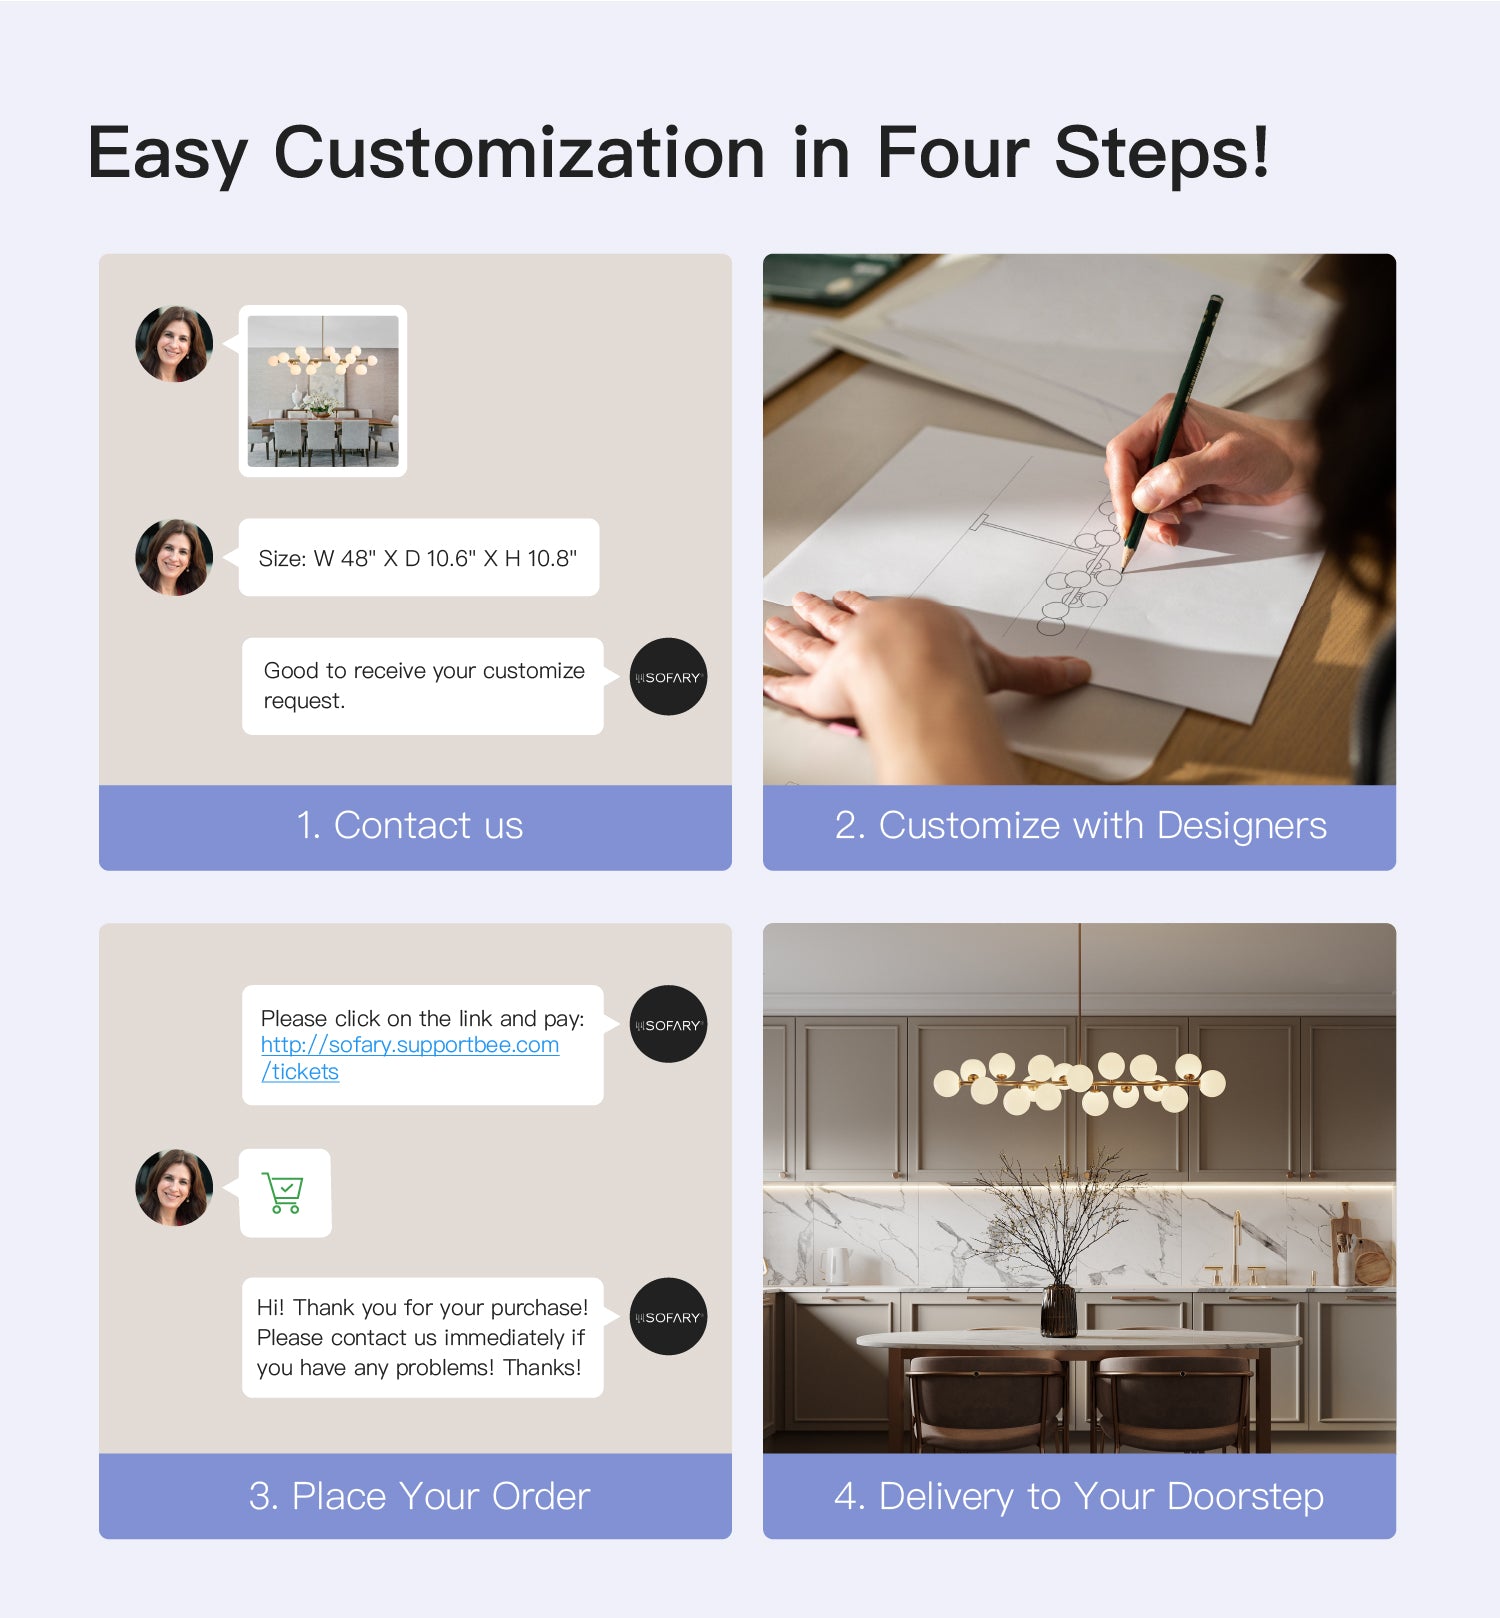 Easy Customization in Four Steps!